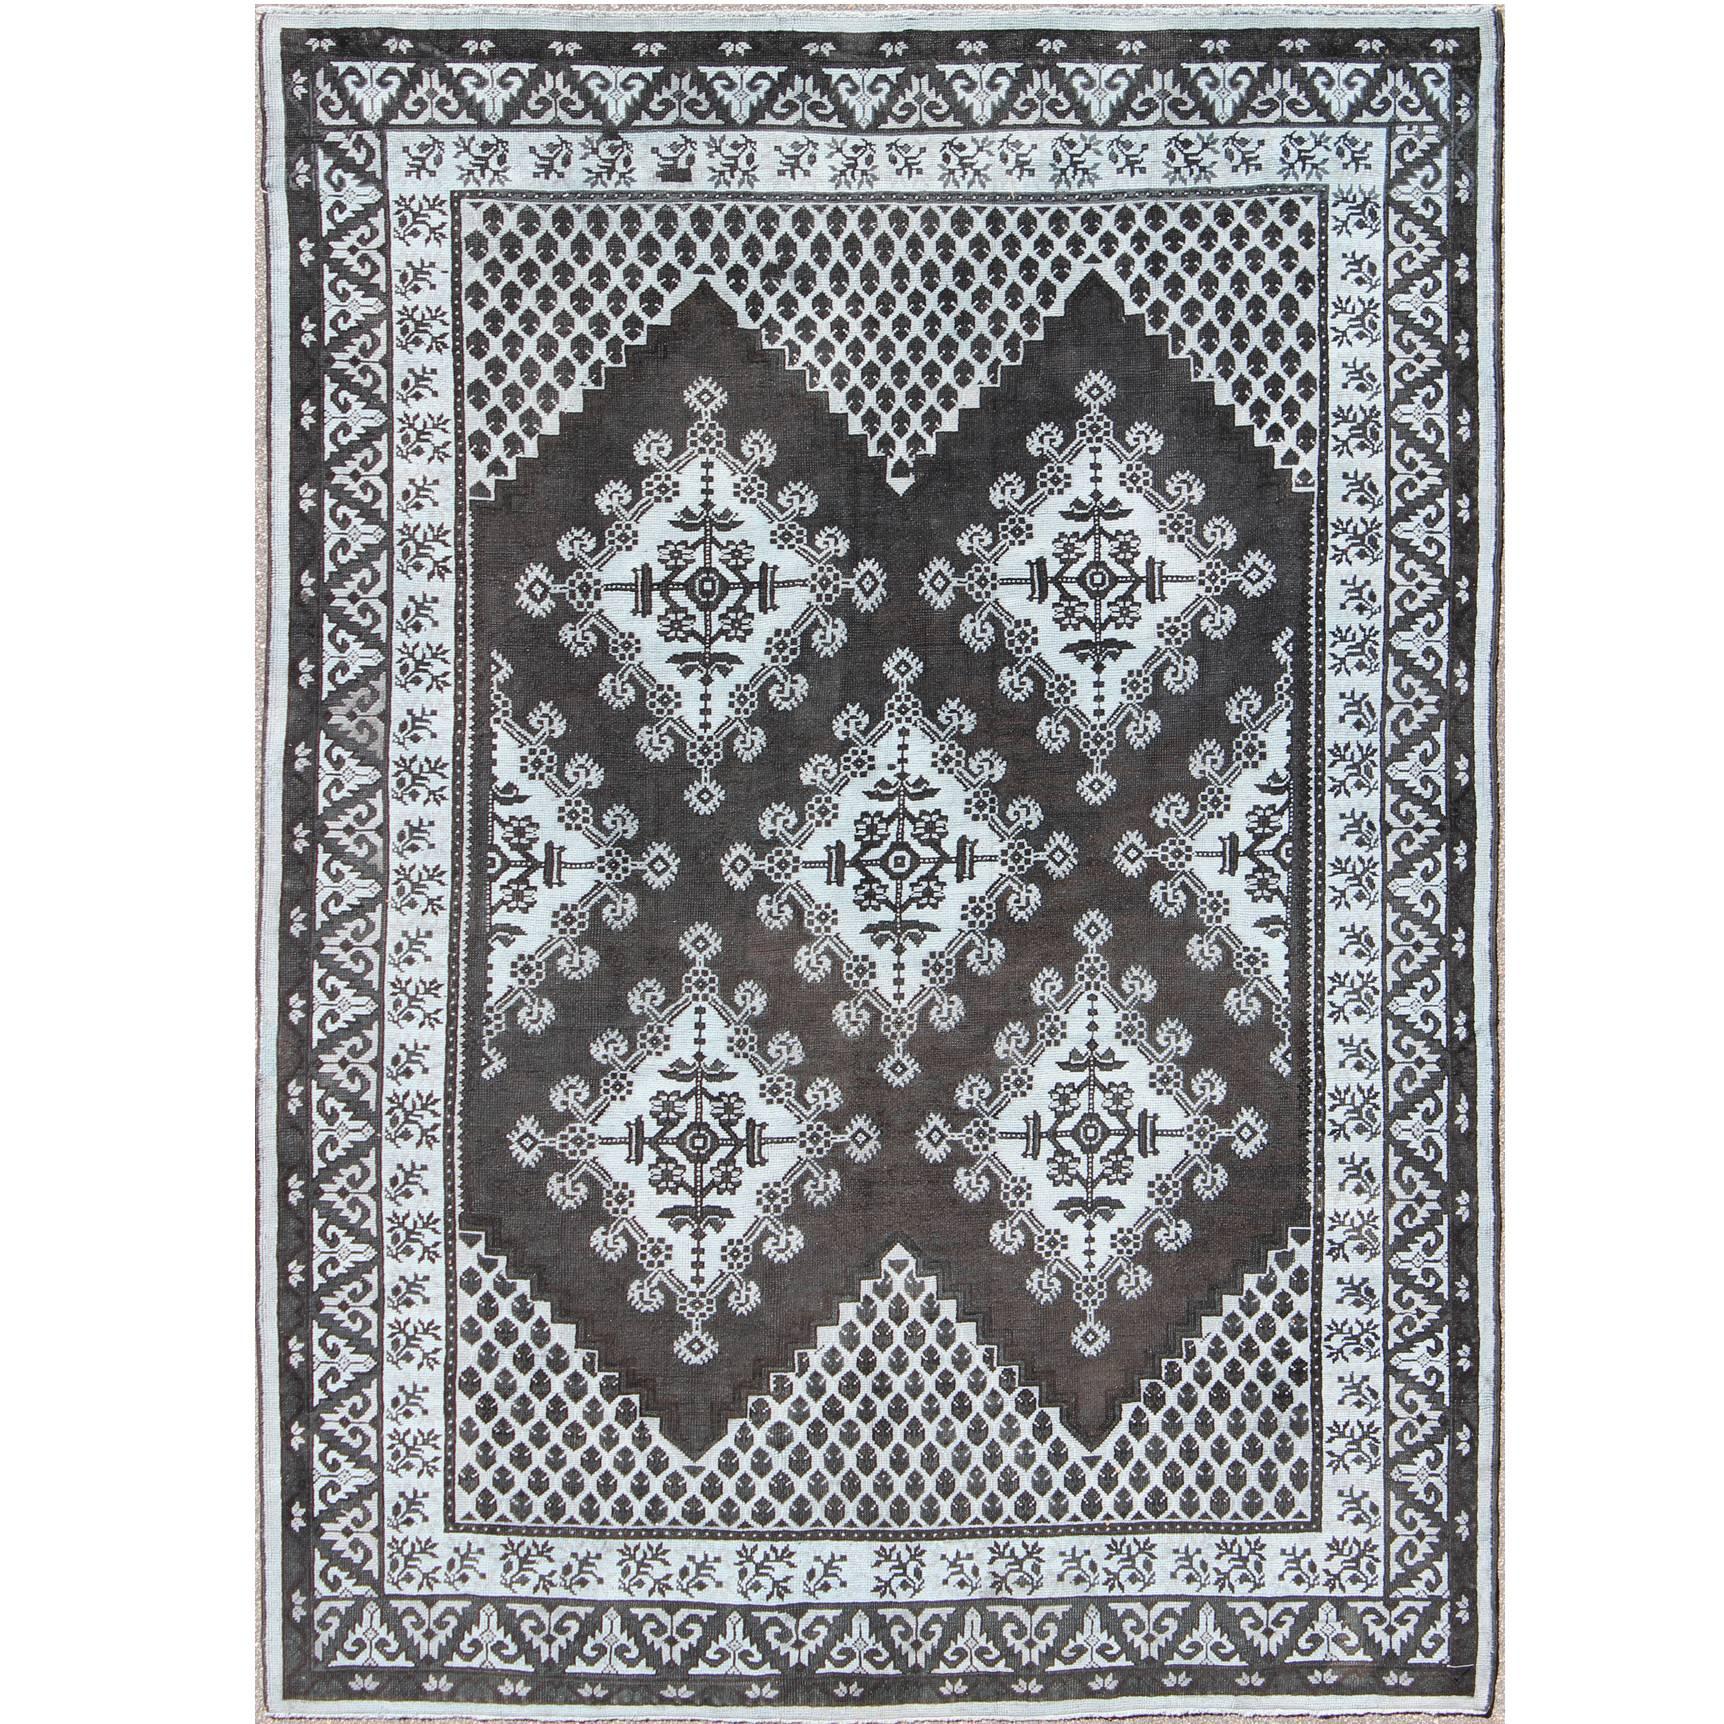 Geometric Design Vintage Tribal Moroccan Rug with Black and Gray